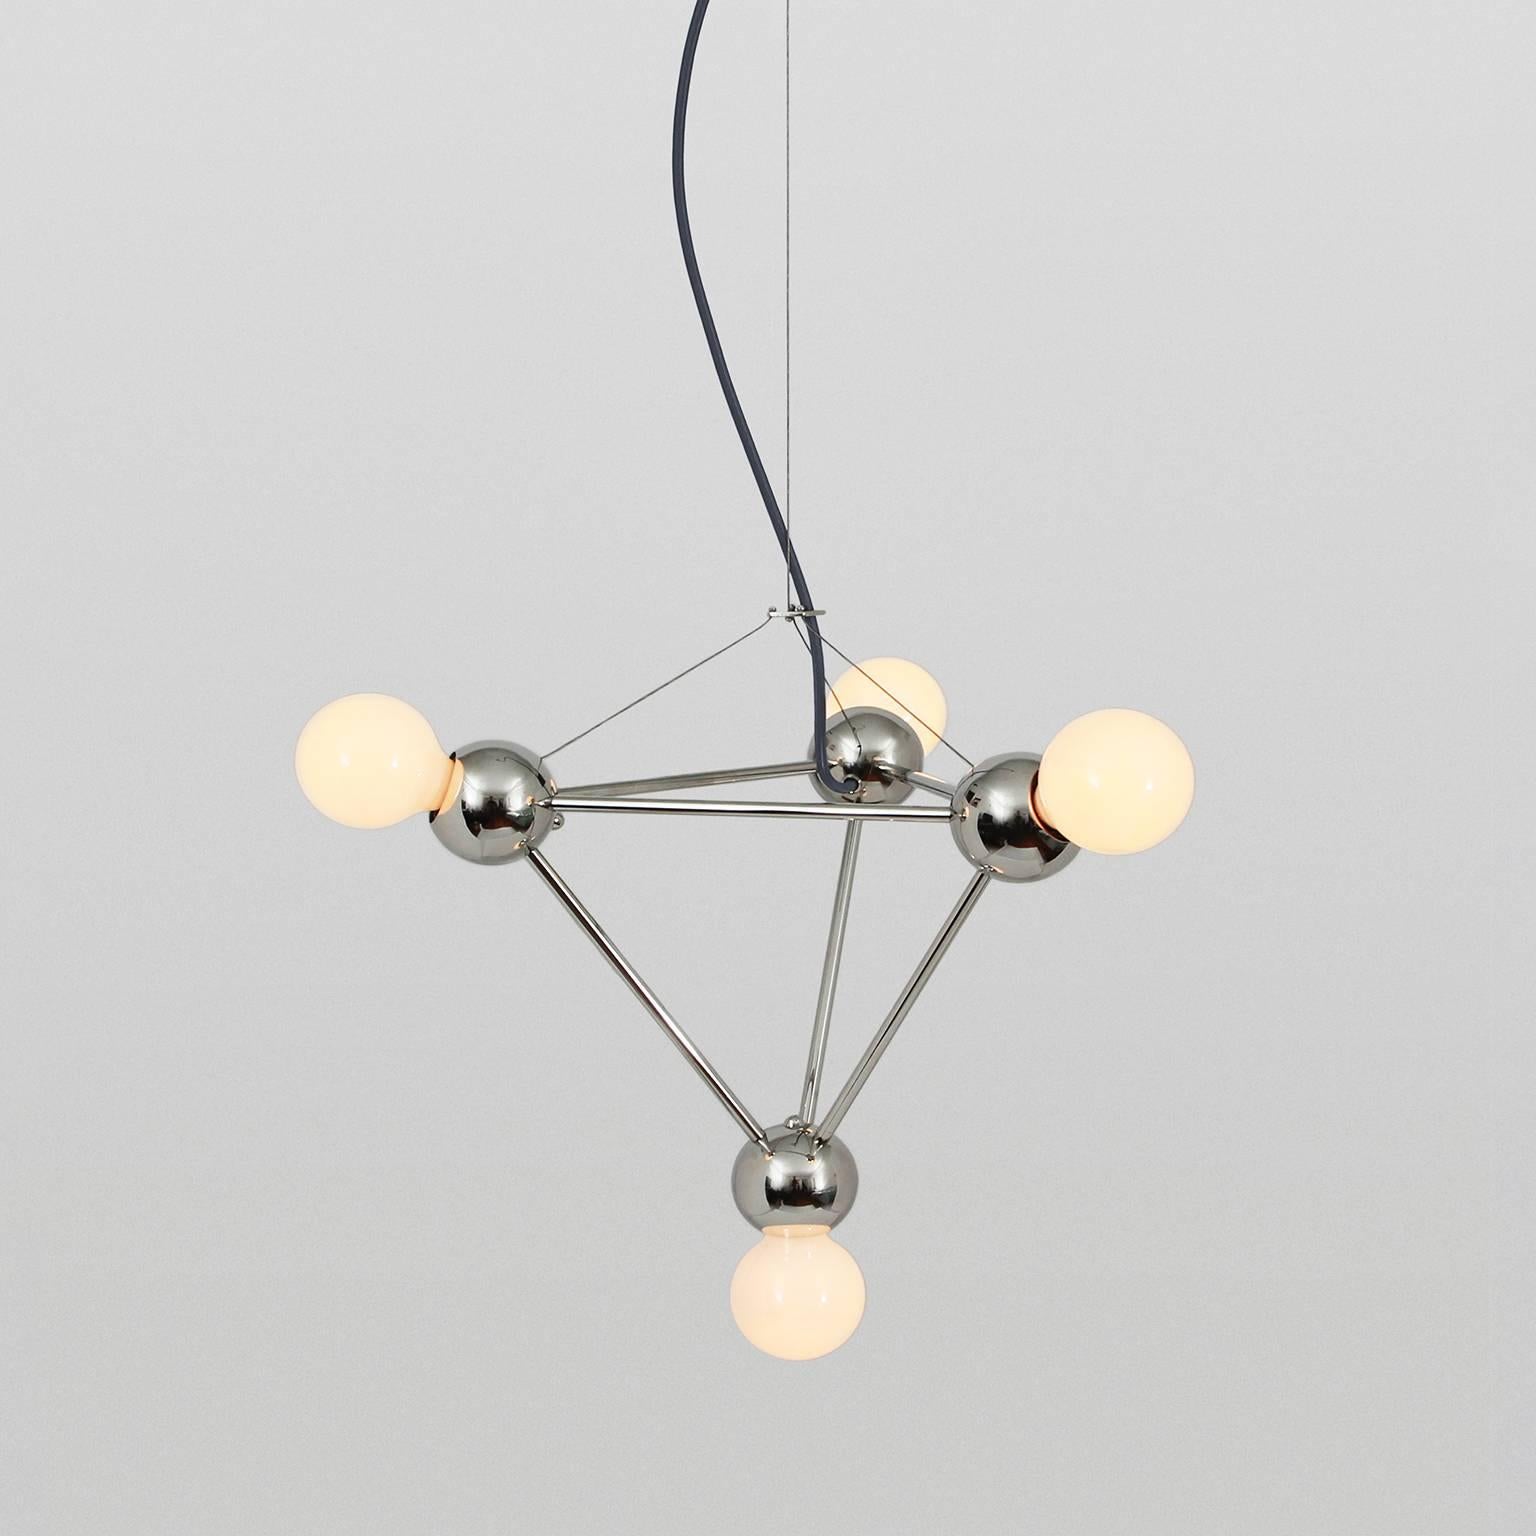 Inspired by 1960s Italian lighting, Lina is an all-brass lighting system designed to create airy geometric fixtures.

Each welded brass sphere joins with solid brass tubing and minimal fastener hardware to form strikingly simple hanging fixtures